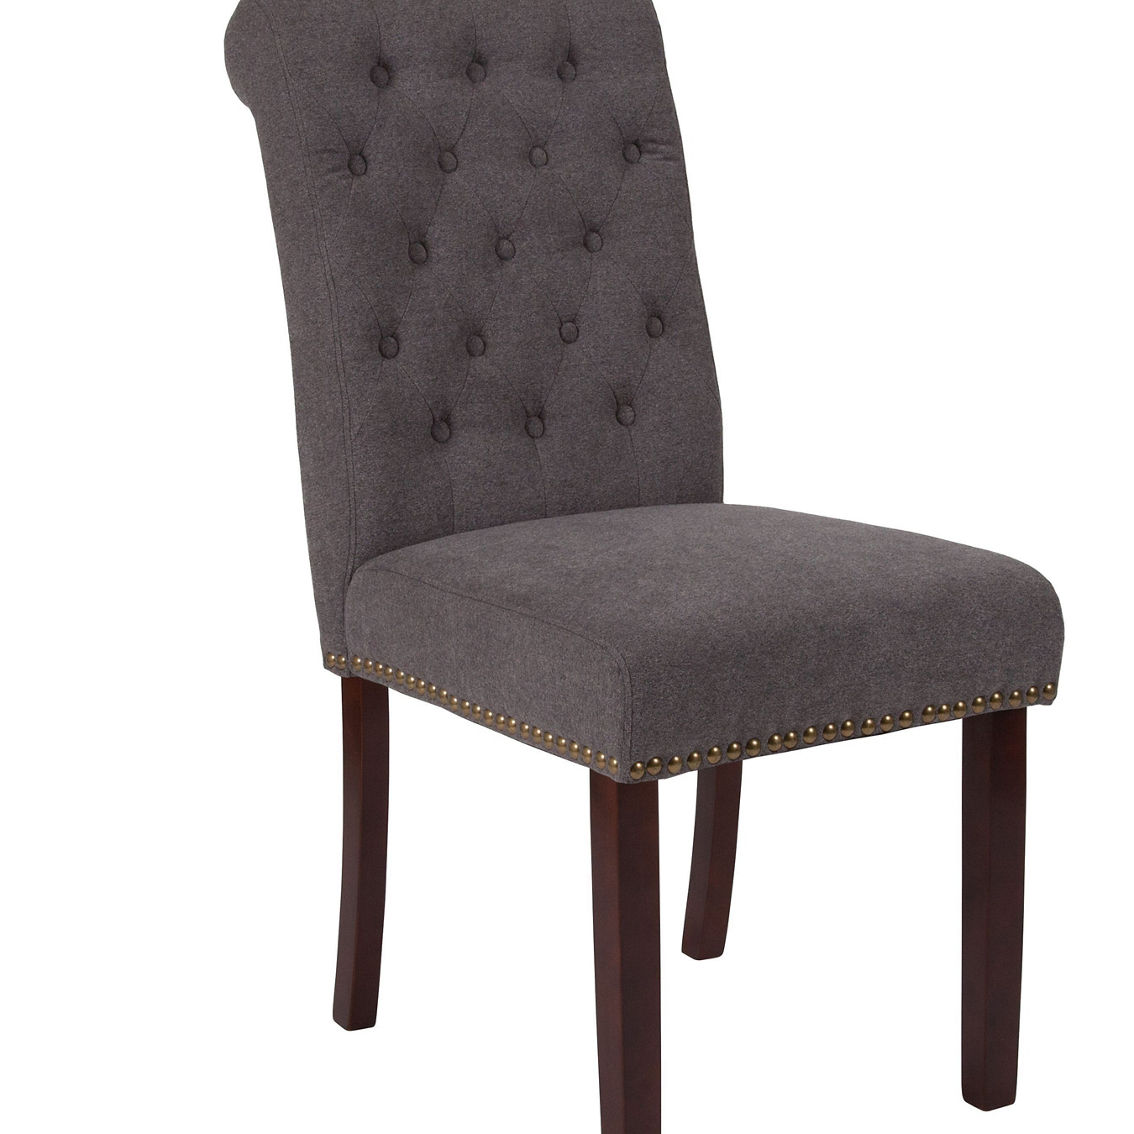 Flash Furniture HERCULES Series Parsons Chair with Rolled Back, Accent Nail Trim - Image 2 of 5